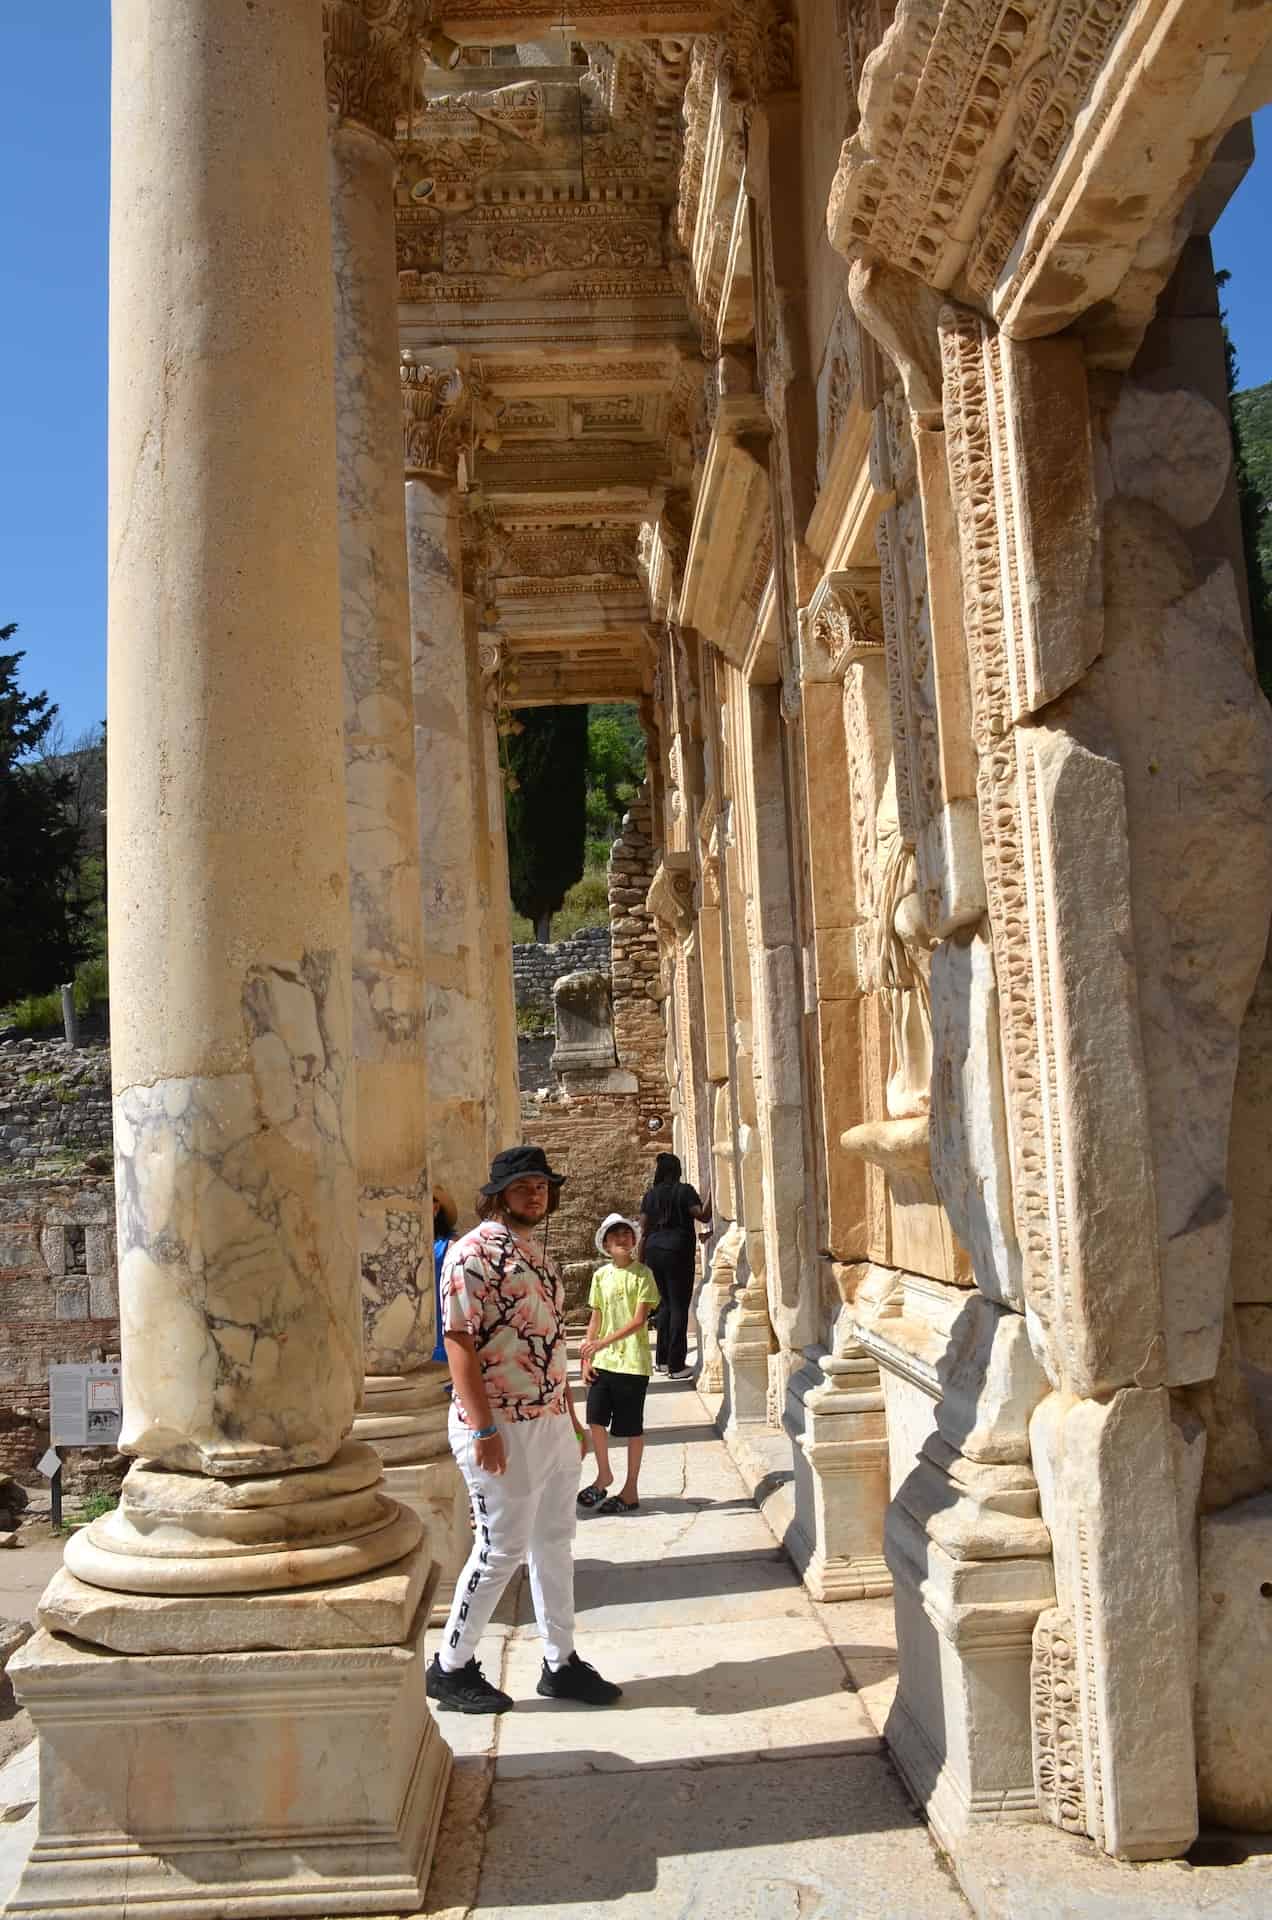 Porch of the Library of Celsus